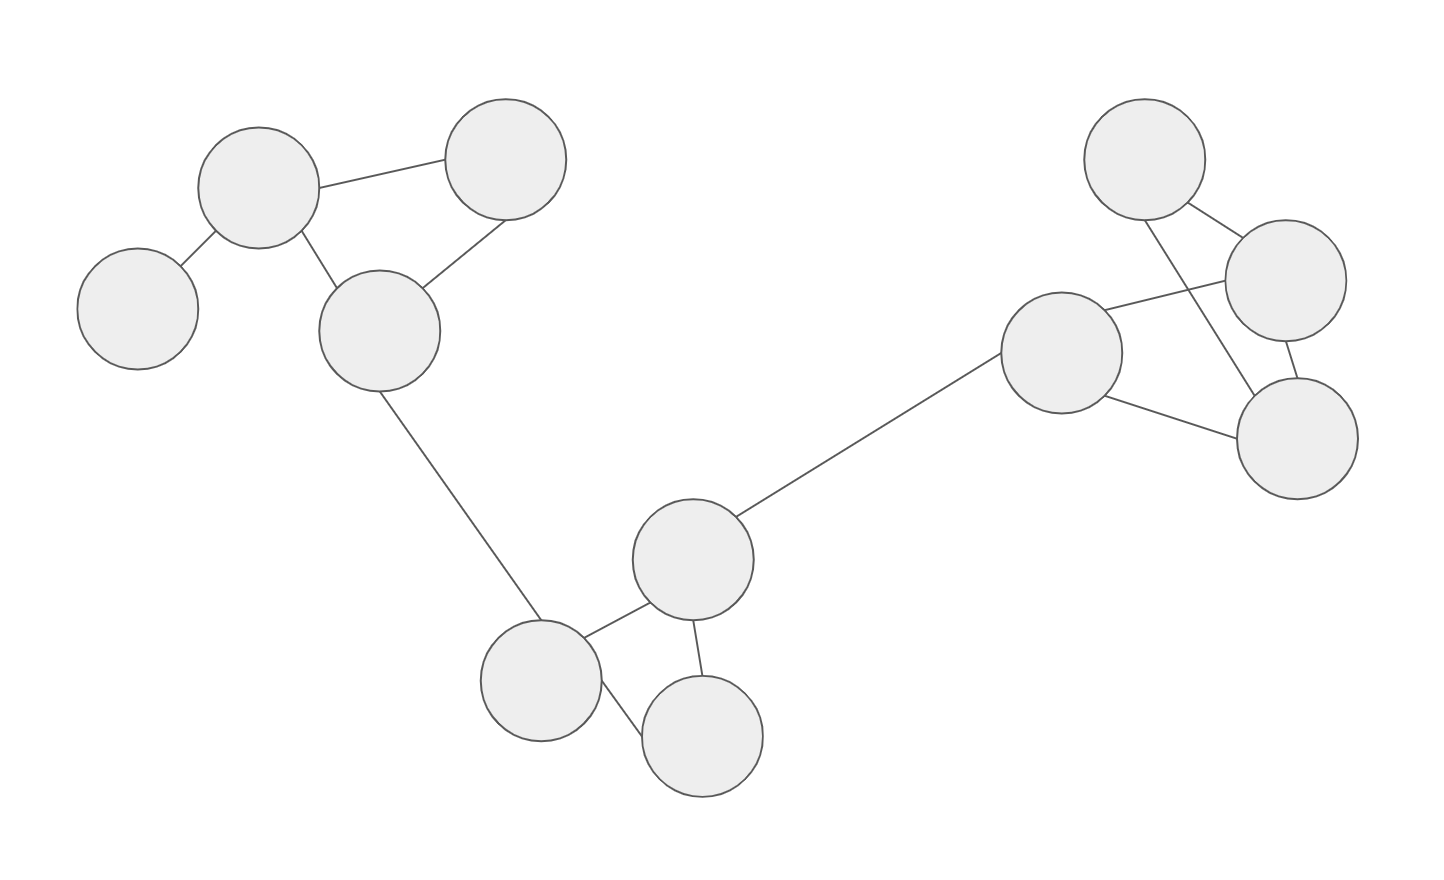 graph with modularity